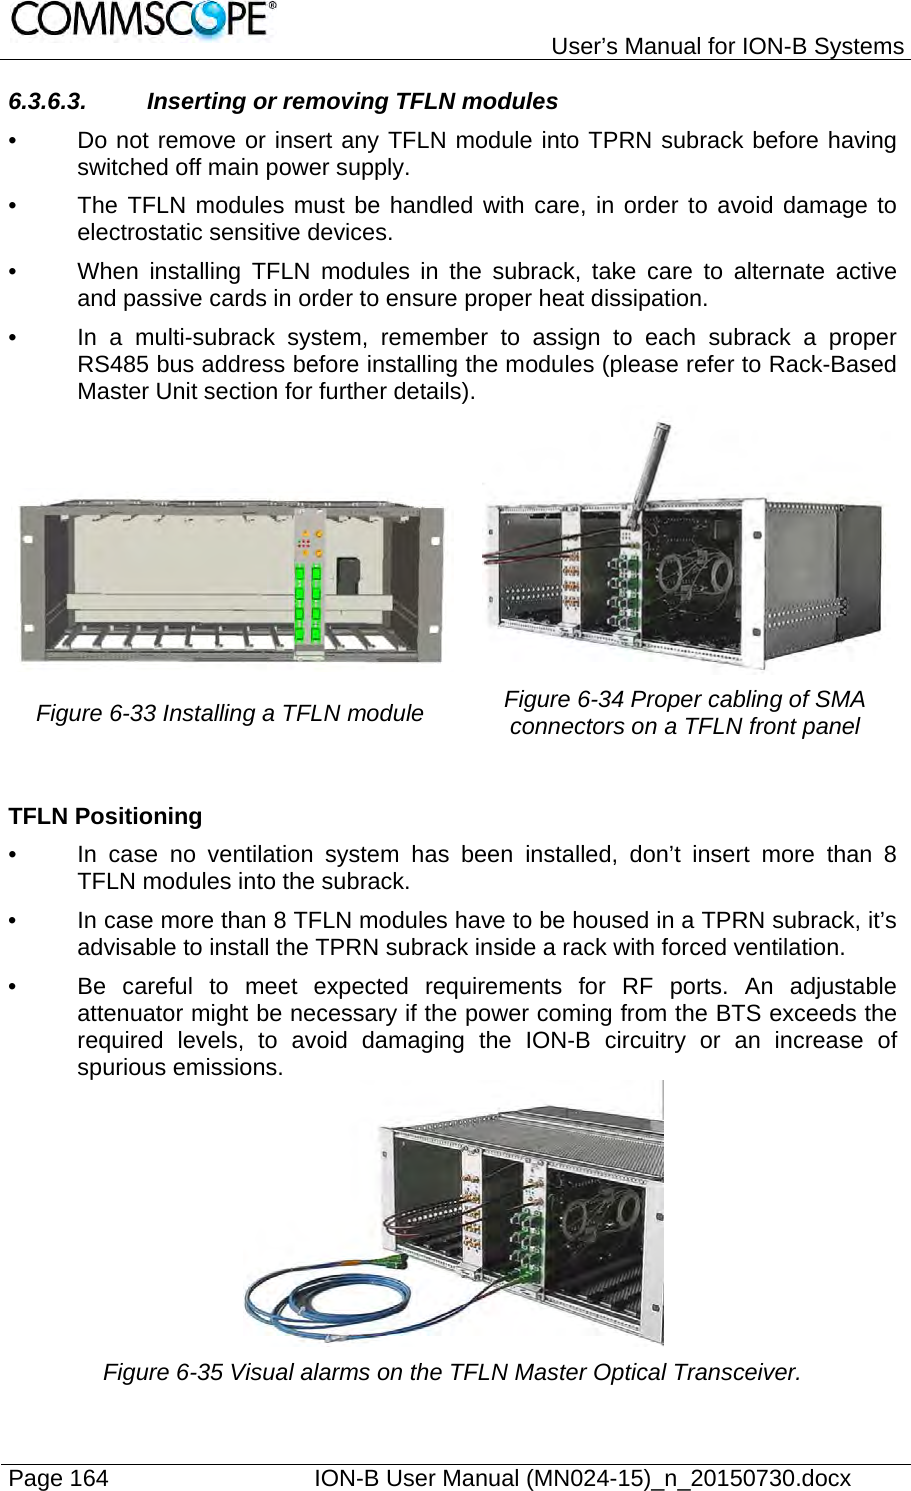   User’s Manual for ION-B Systems Page 164    ION-B User Manual (MN024-15)_n_20150730.docx  6.3.6.3.  Inserting or removing TFLN modules •  Do not remove or insert any TFLN module into TPRN subrack before having switched off main power supply. •  The TFLN modules must be handled with care, in order to avoid damage to electrostatic sensitive devices. •  When installing TFLN modules in the subrack, take care to alternate active and passive cards in order to ensure proper heat dissipation. •  In a multi-subrack system, remember to assign to each subrack a proper RS485 bus address before installing the modules (please refer to Rack-Based Master Unit section for further details).    Figure 6-33 Installing a TFLN module  Figure 6-34 Proper cabling of SMA connectors on a TFLN front panel  TFLN Positioning •  In case no ventilation system has been installed, don’t insert more than 8 TFLN modules into the subrack.  •  In case more than 8 TFLN modules have to be housed in a TPRN subrack, it’s advisable to install the TPRN subrack inside a rack with forced ventilation. •  Be careful to meet expected requirements for RF ports. An adjustable attenuator might be necessary if the power coming from the BTS exceeds the required levels, to avoid damaging the ION-B circuitry or an increase of spurious emissions.  Figure 6-35 Visual alarms on the TFLN Master Optical Transceiver. 